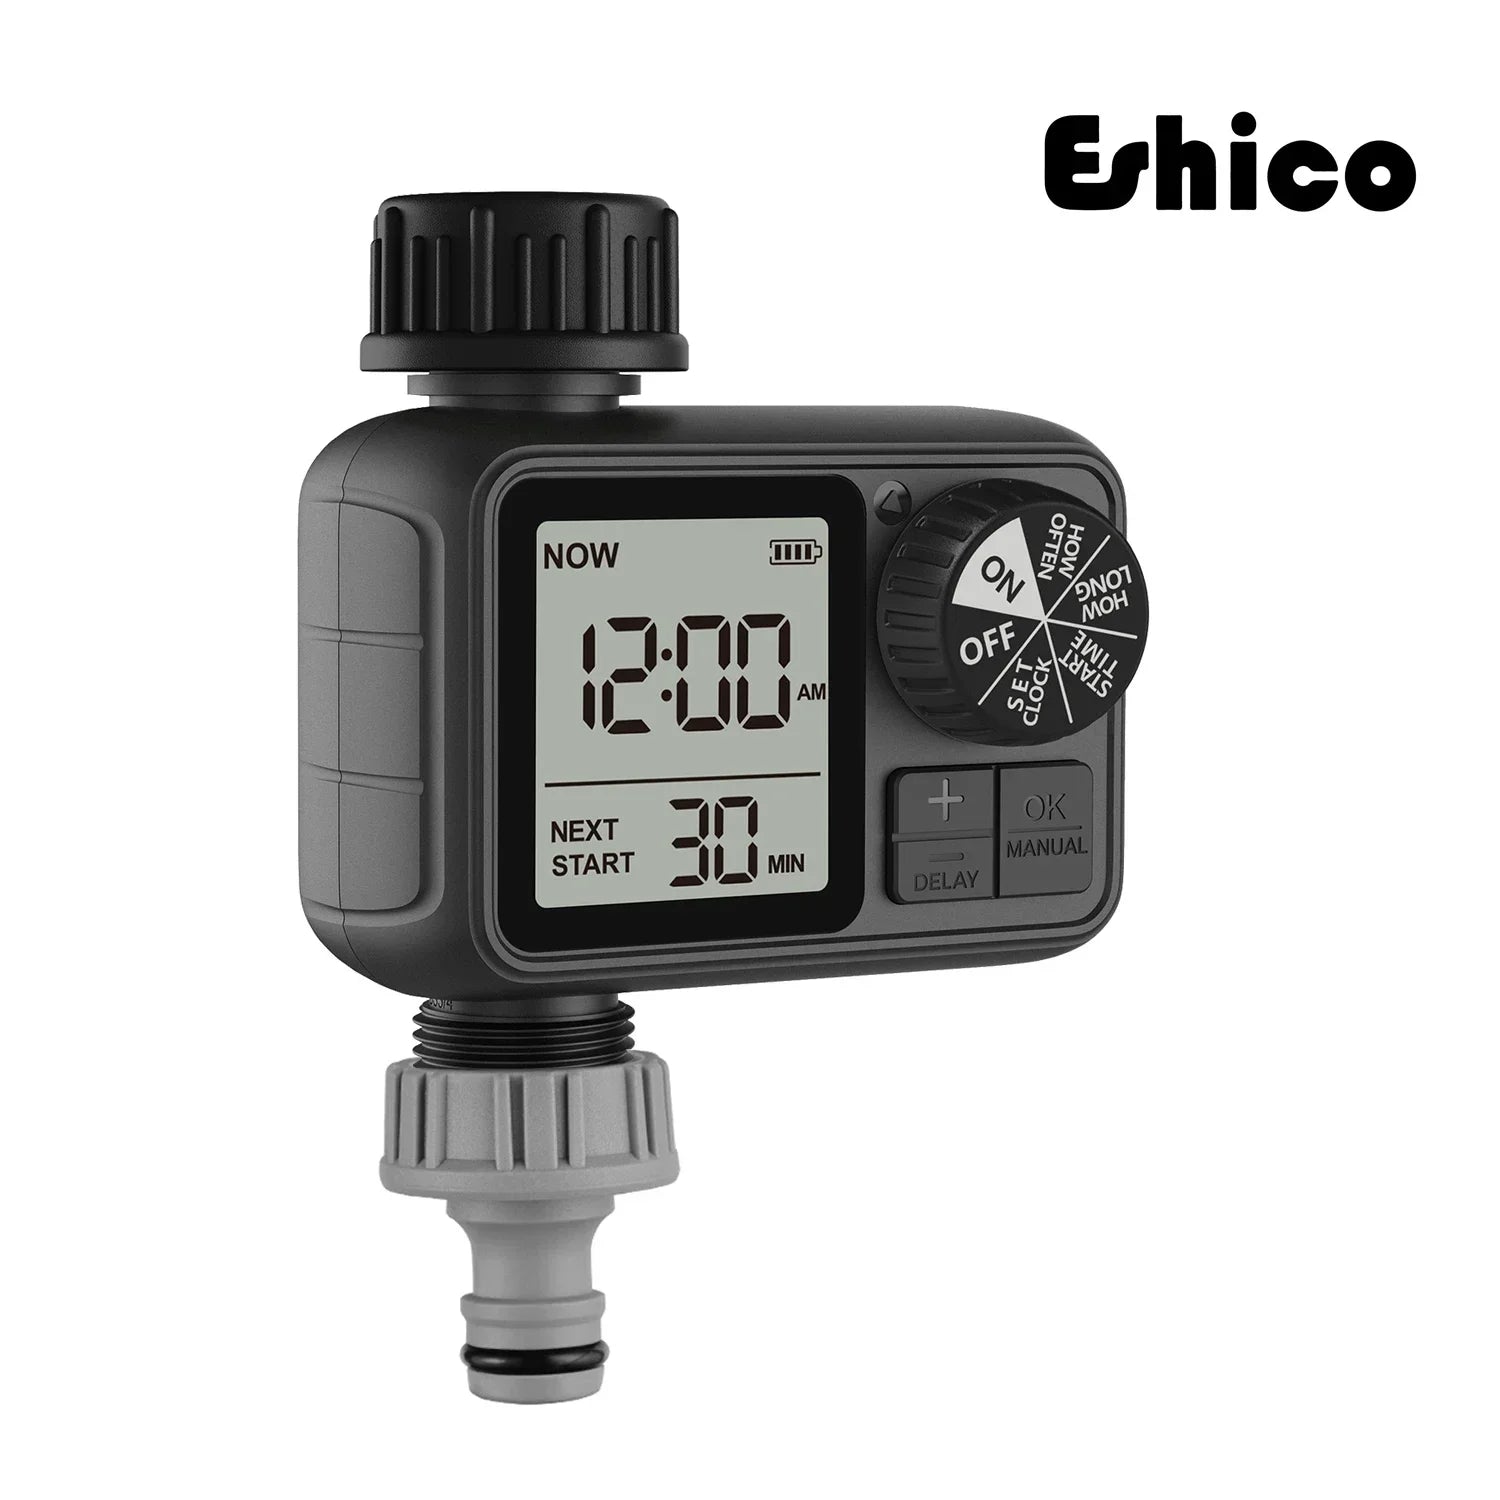 Eshico HCT-M02 Water Timer Newest Digital Sprinkler with Manual/Automatic 2-Watering Modes Suitable for Different Outdoor Scenes